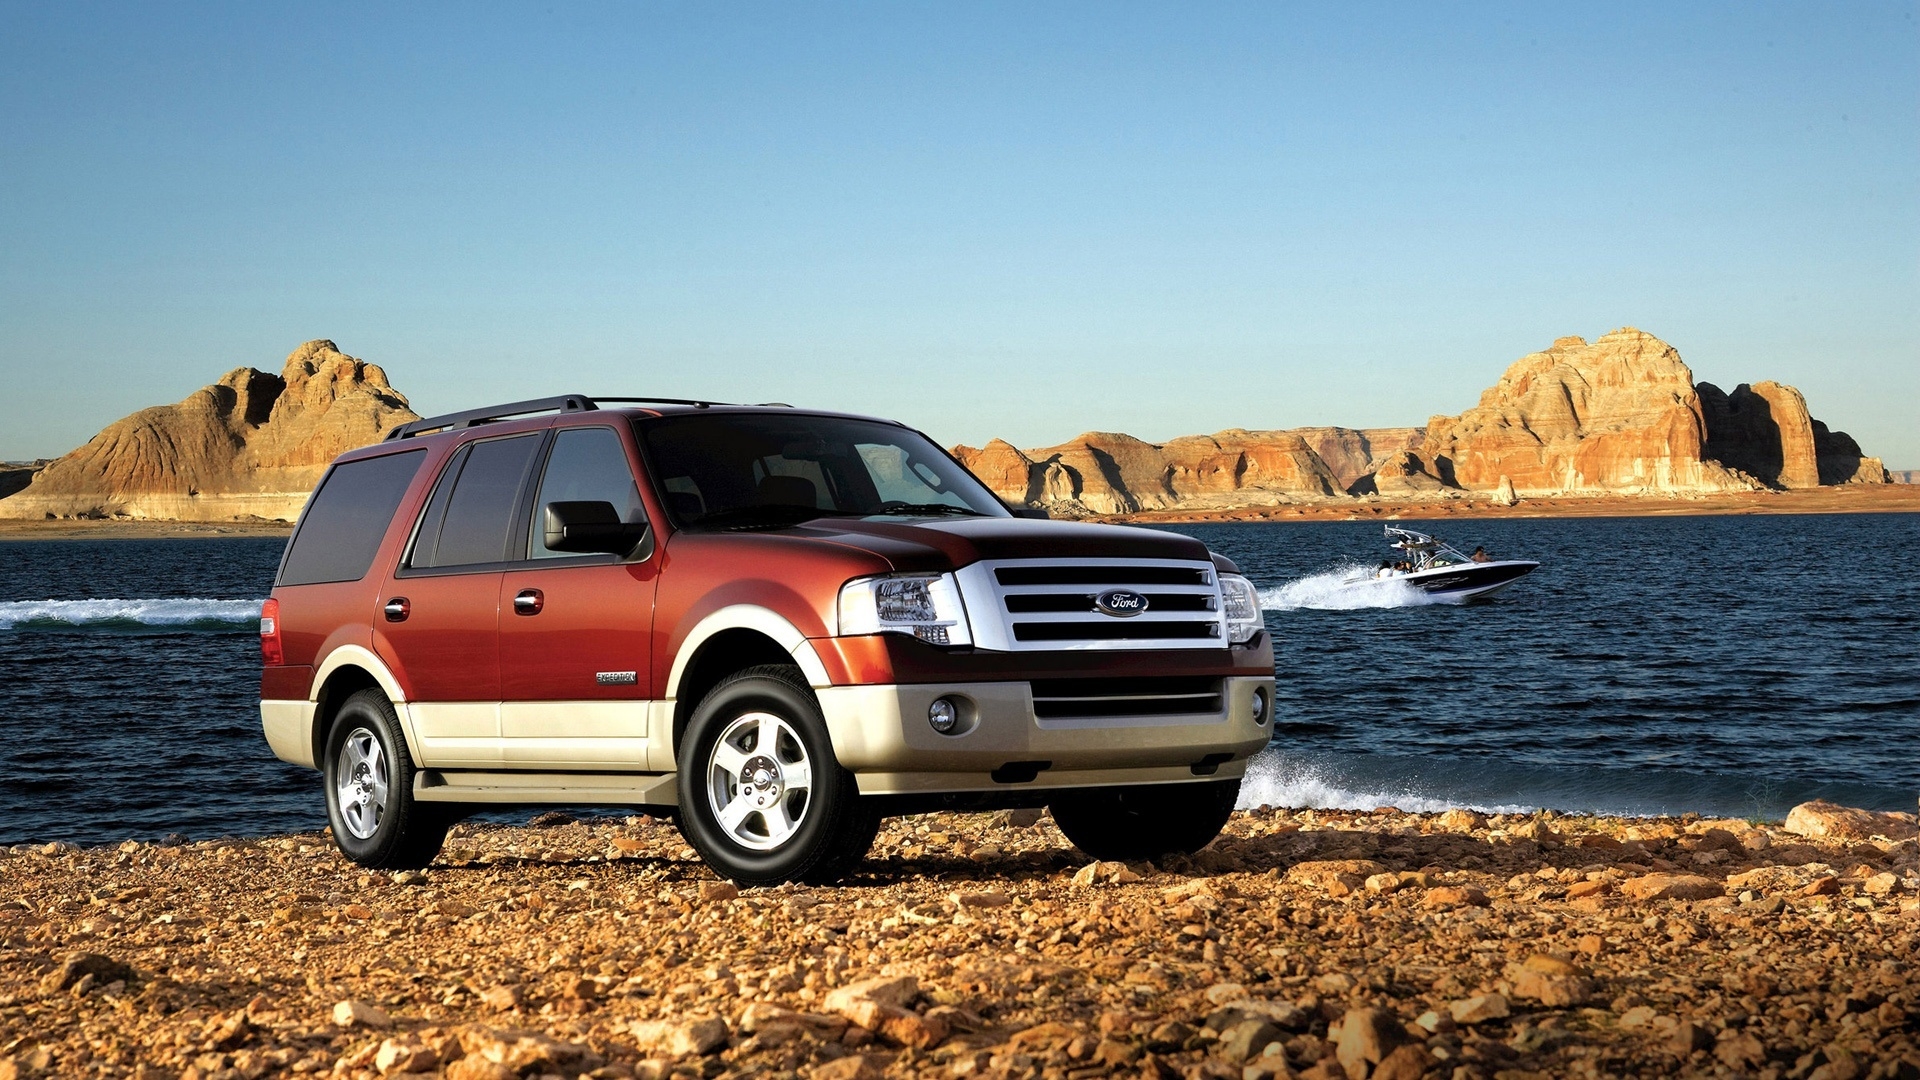 2010 Ford Expedition for 1920 x 1080 HDTV 1080p resolution